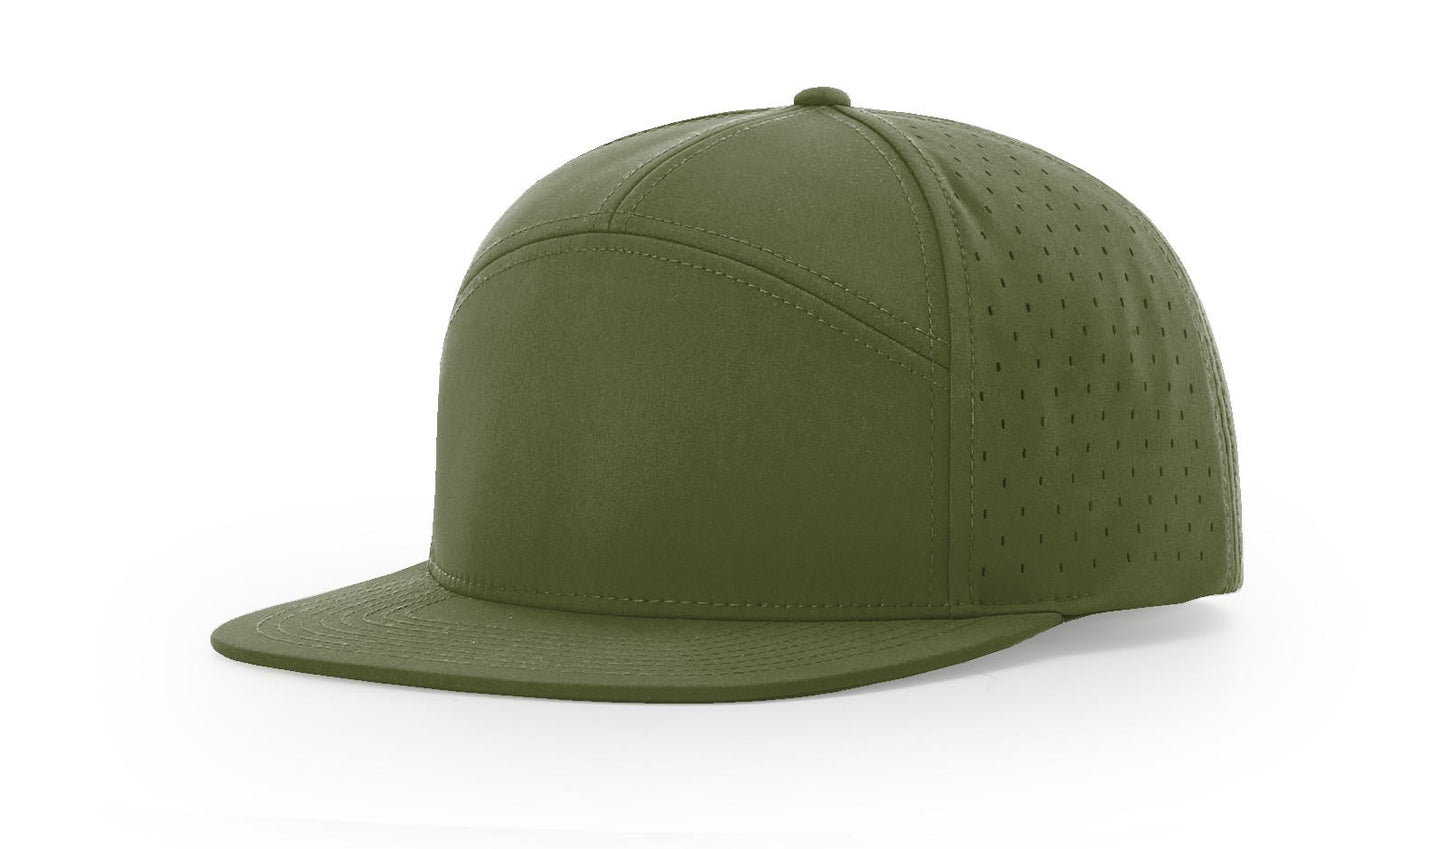 Richardson 169 Cannon Laser Perforated Cap